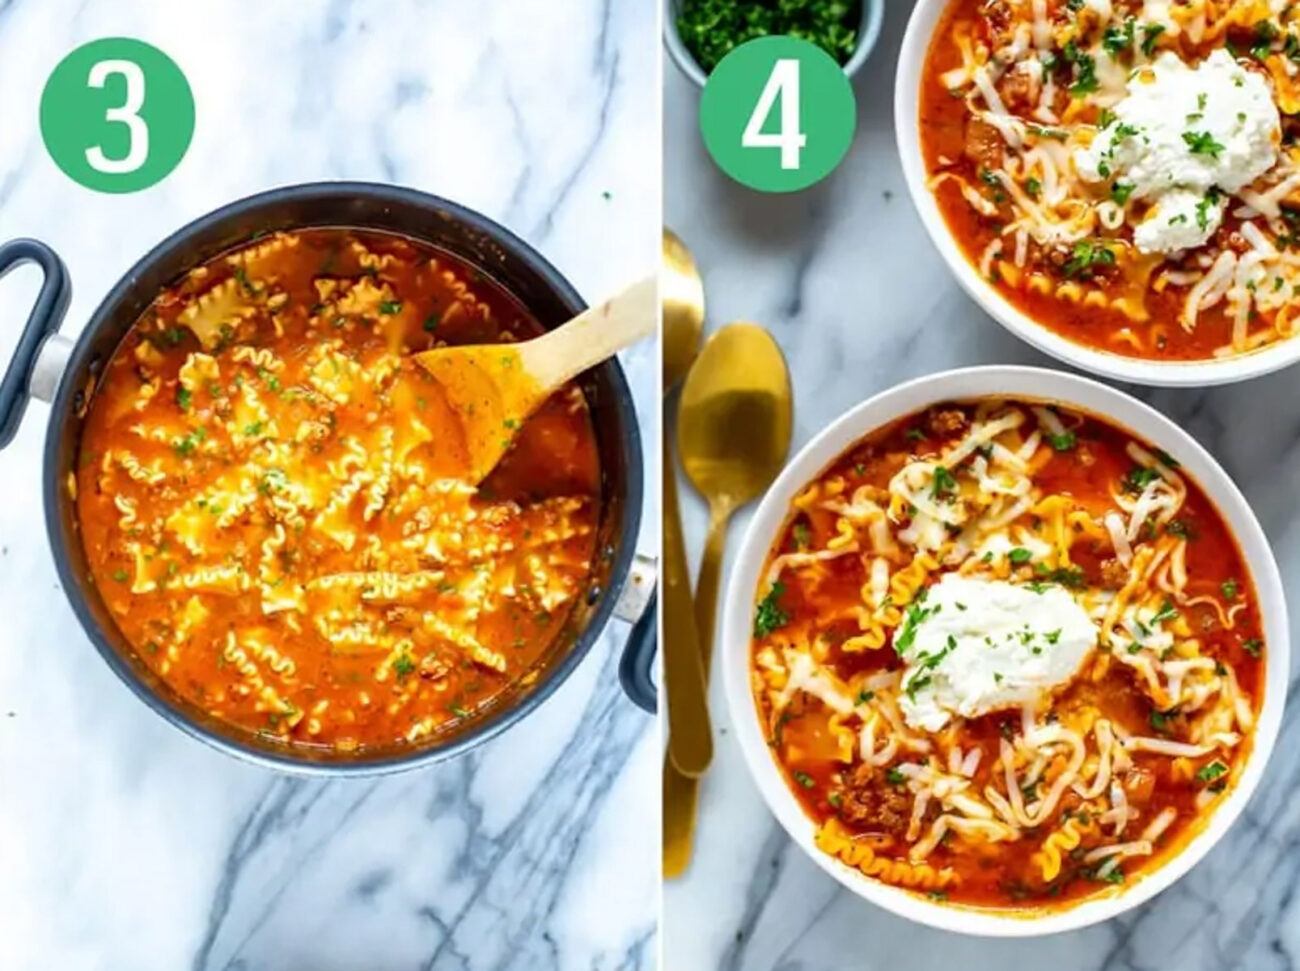 Steps 3 and 4 for making one pot lasagna soup: Add in rest of ingredients then serve and enjoy.